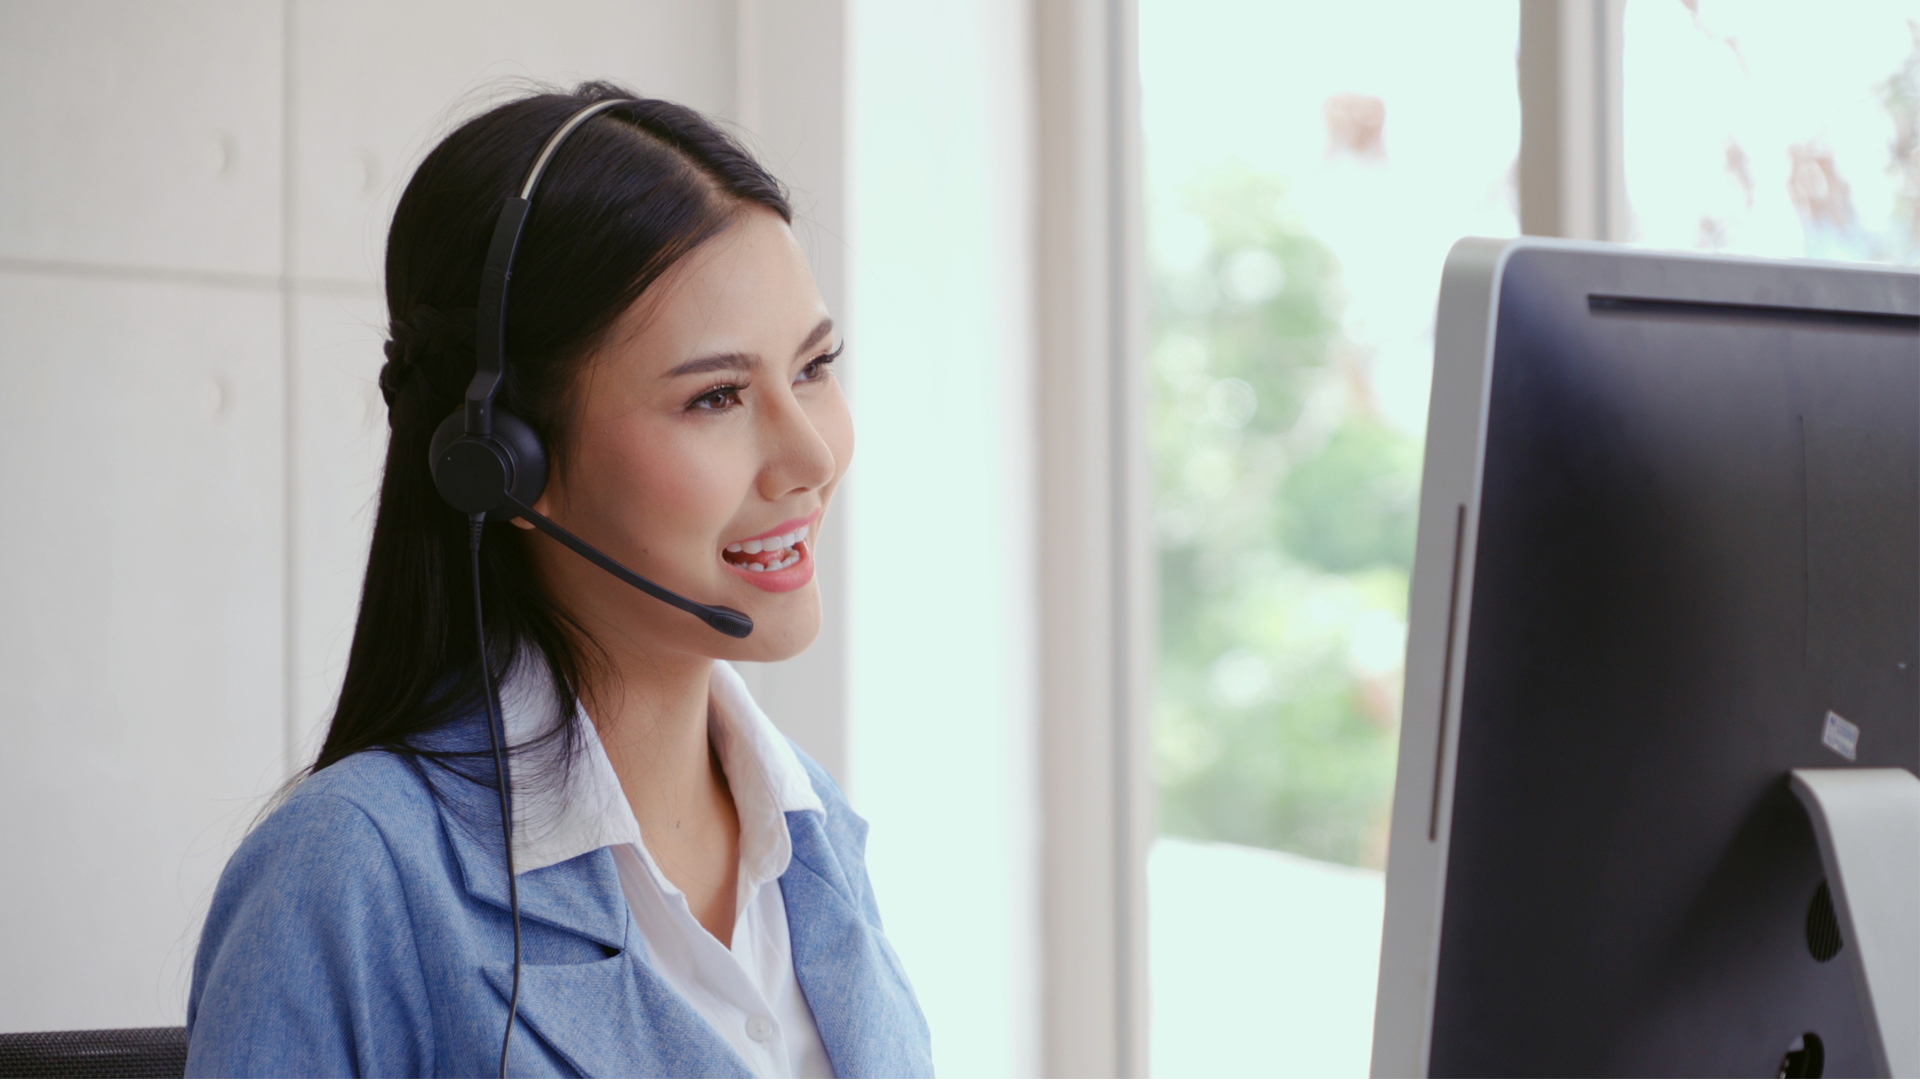 Customer support agent or call center with headset works on desktop computer